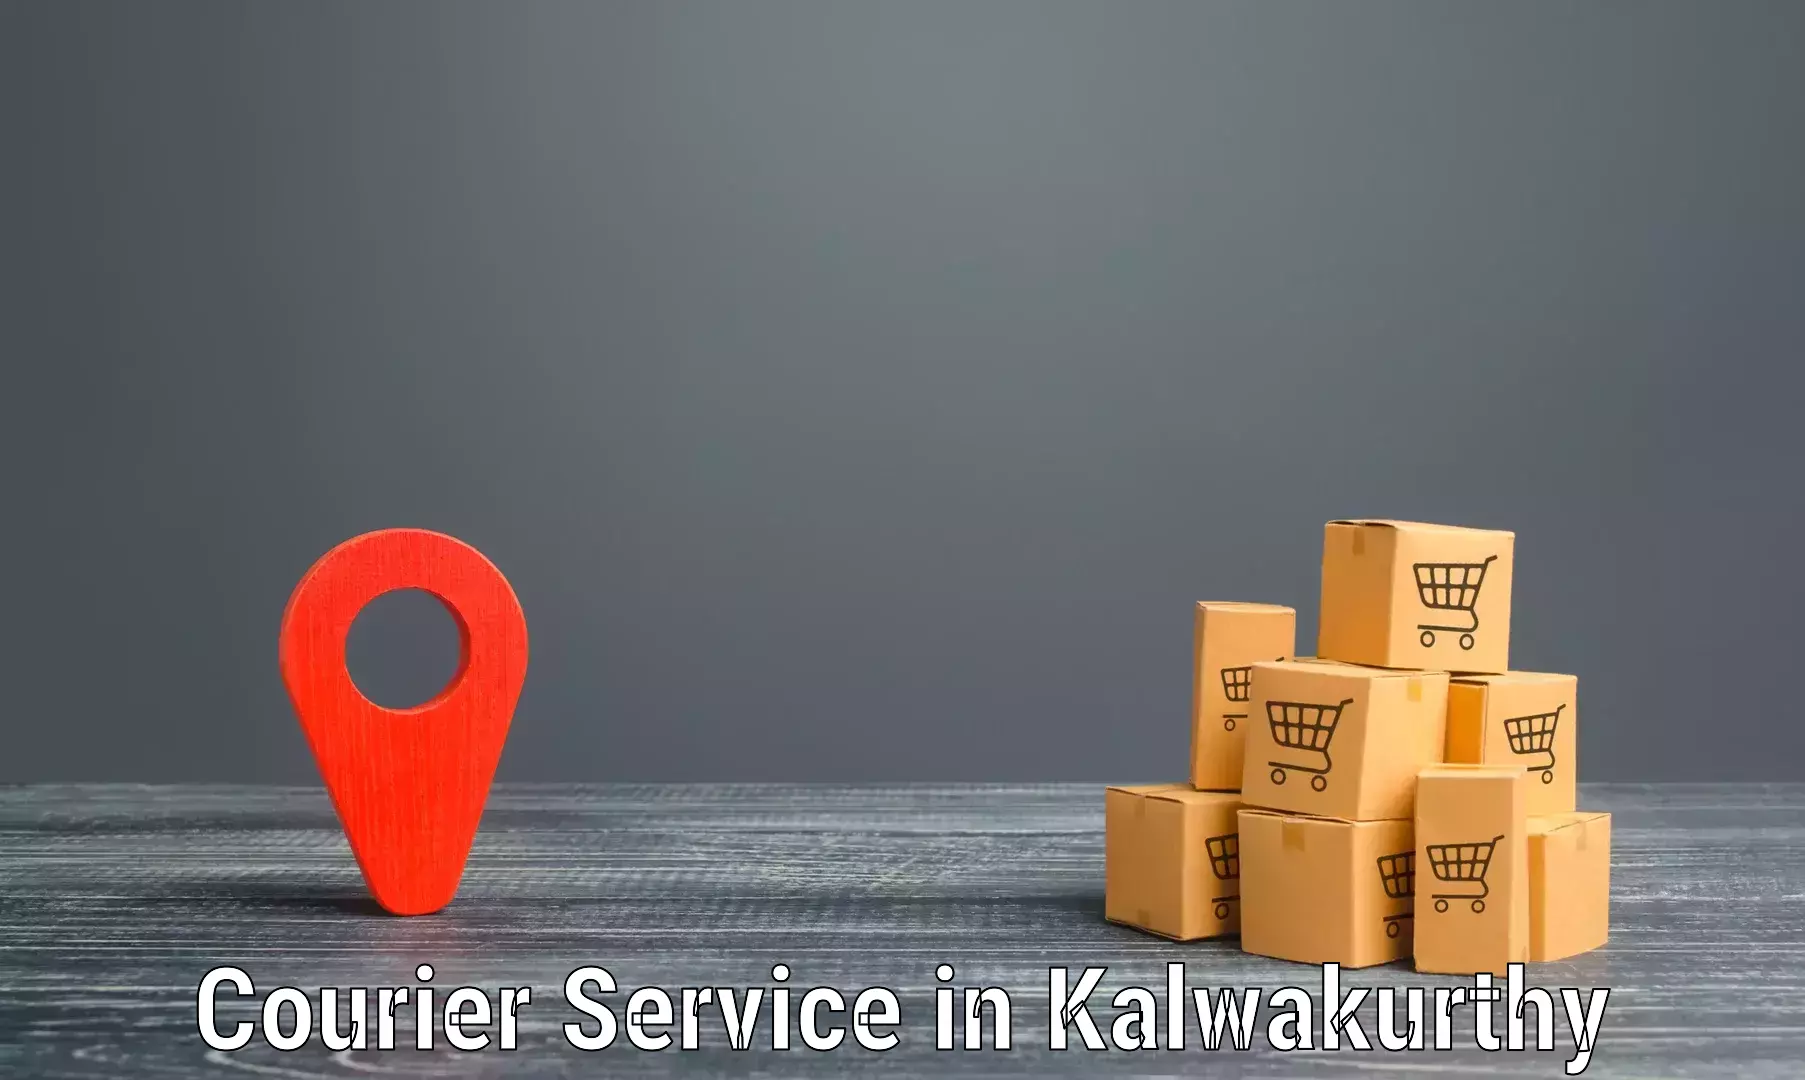 Cost-effective shipping solutions in Kalwakurthy